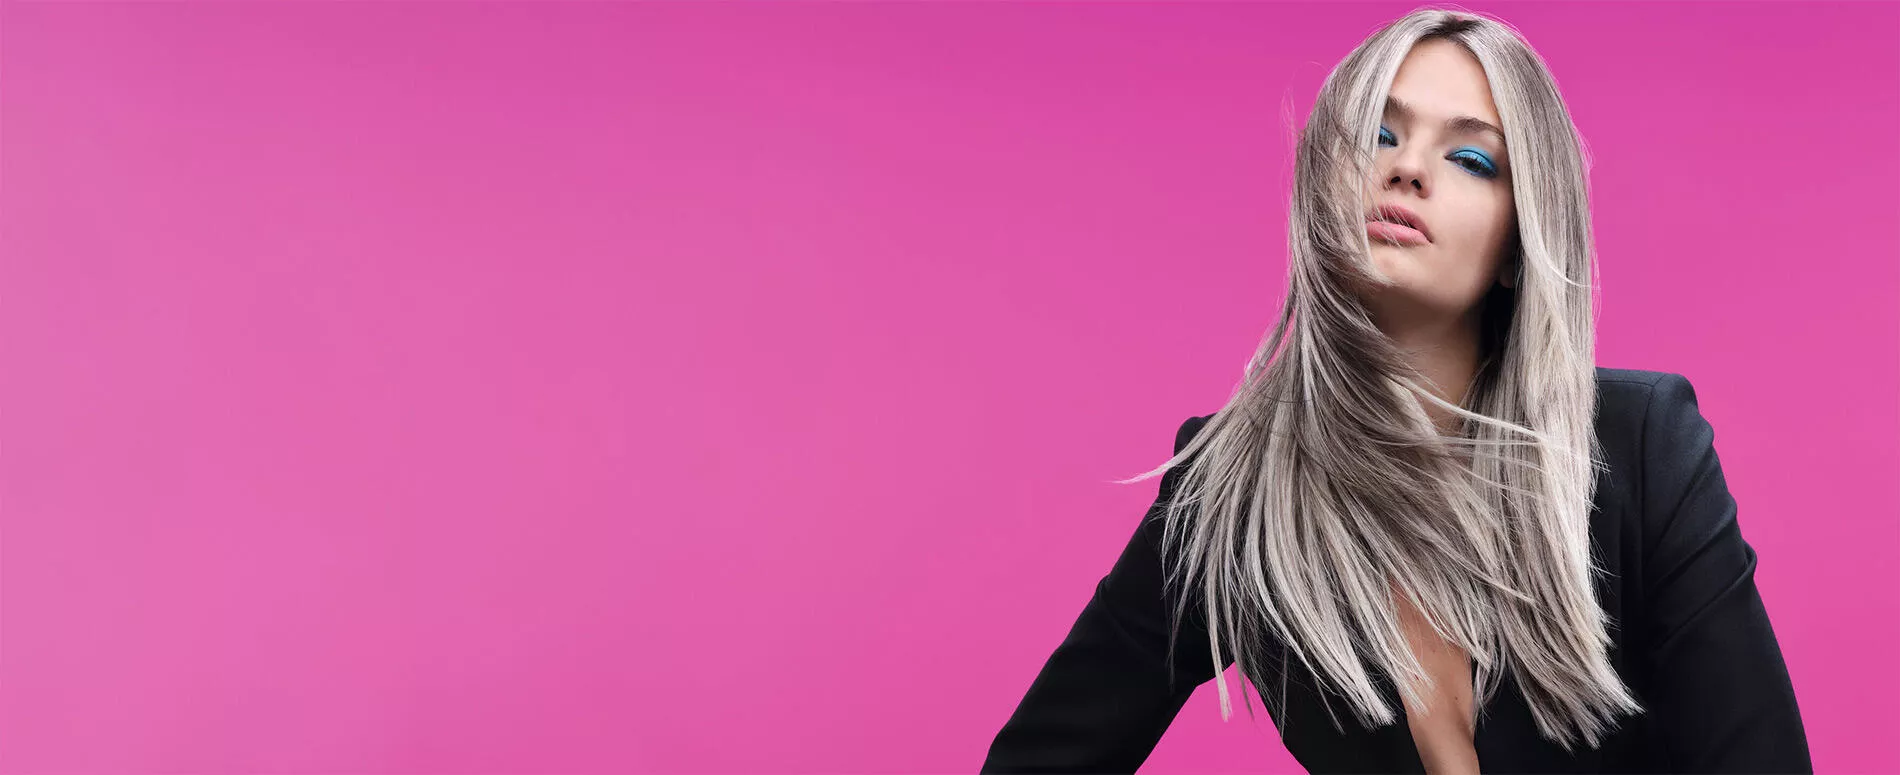 Blonde with express face frames color service on a pink background